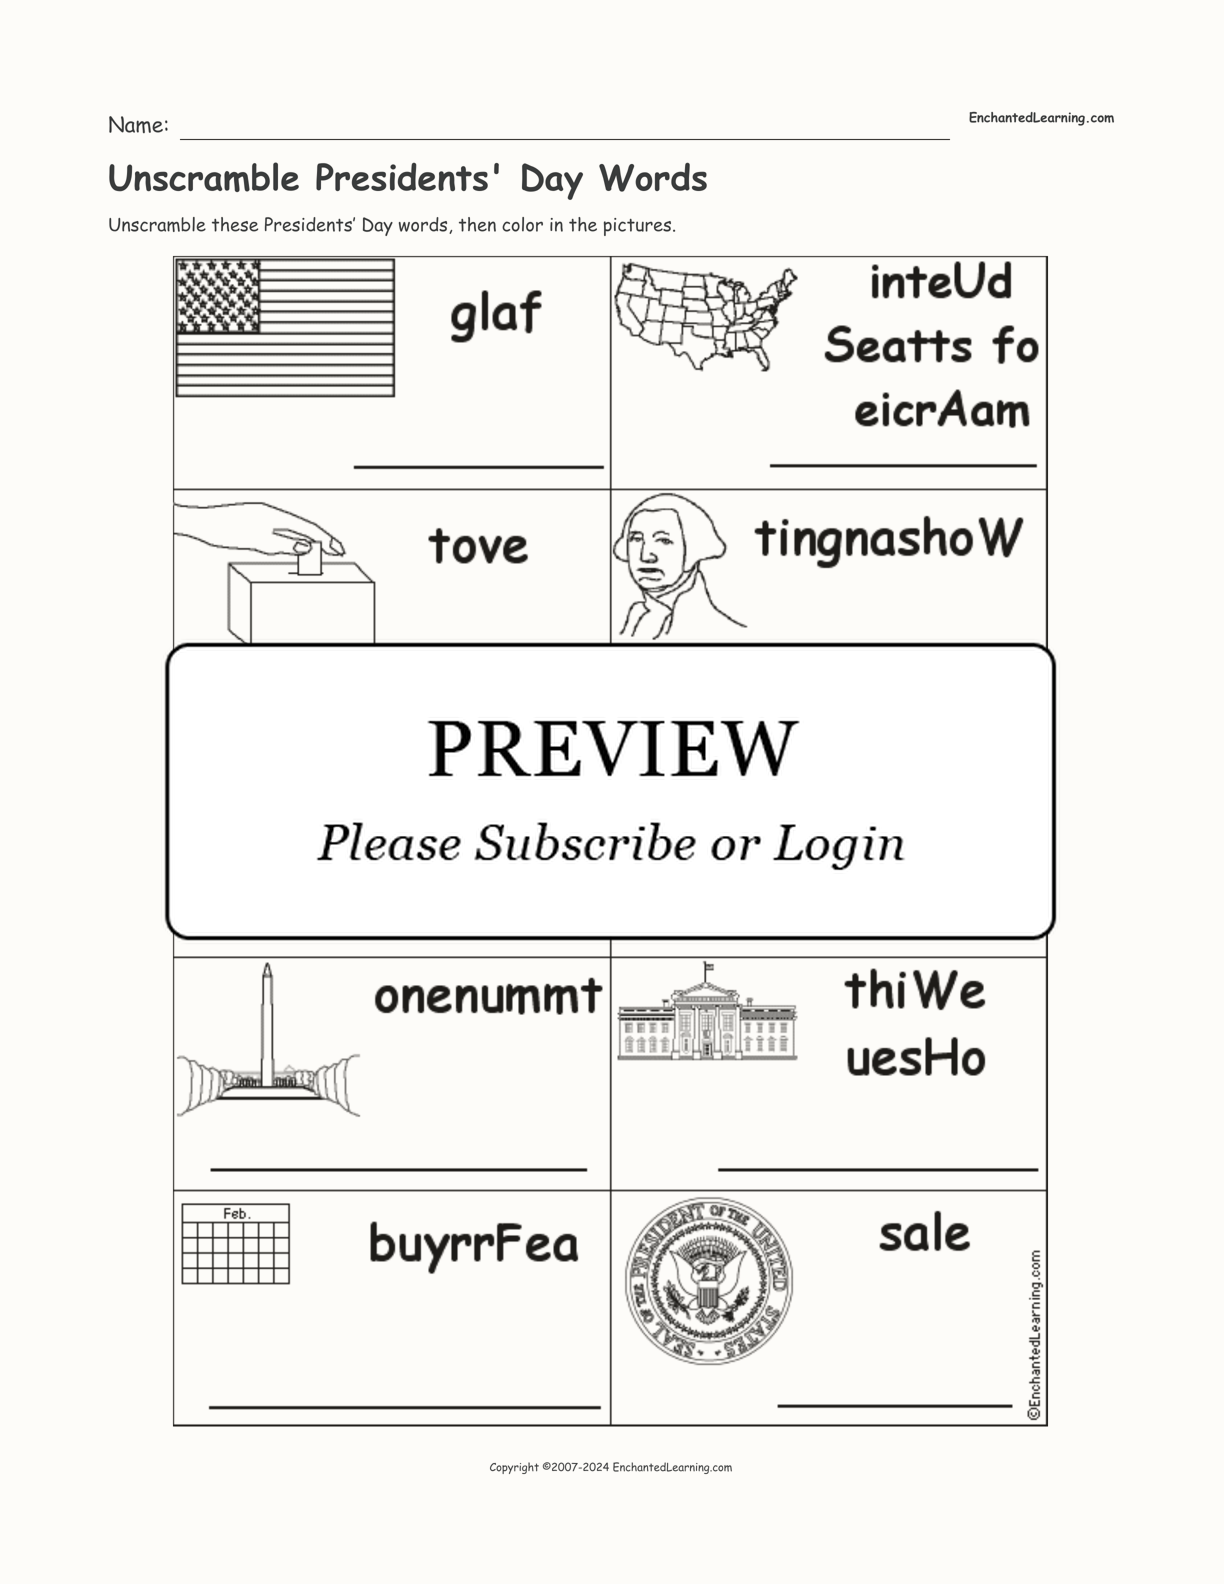 Unscramble Presidents' Day Words interactive worksheet page 1